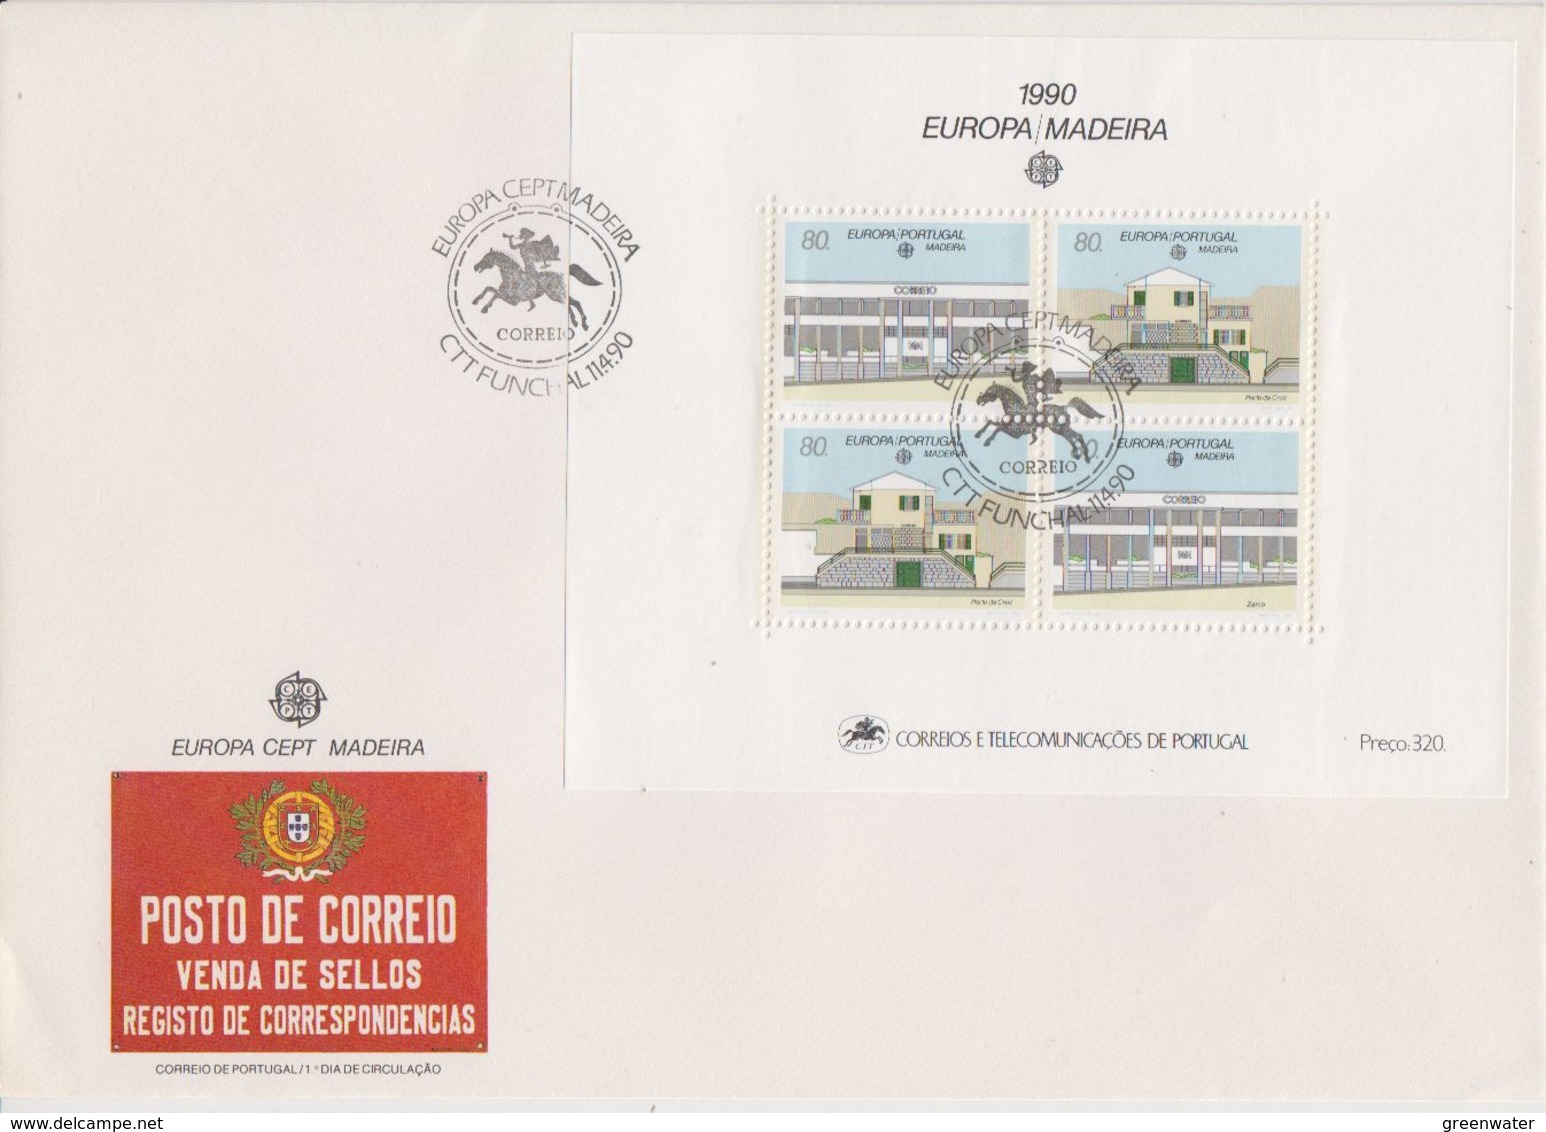 Europa Cept 1990 Madeira M/s FDC (F7821) - 1990